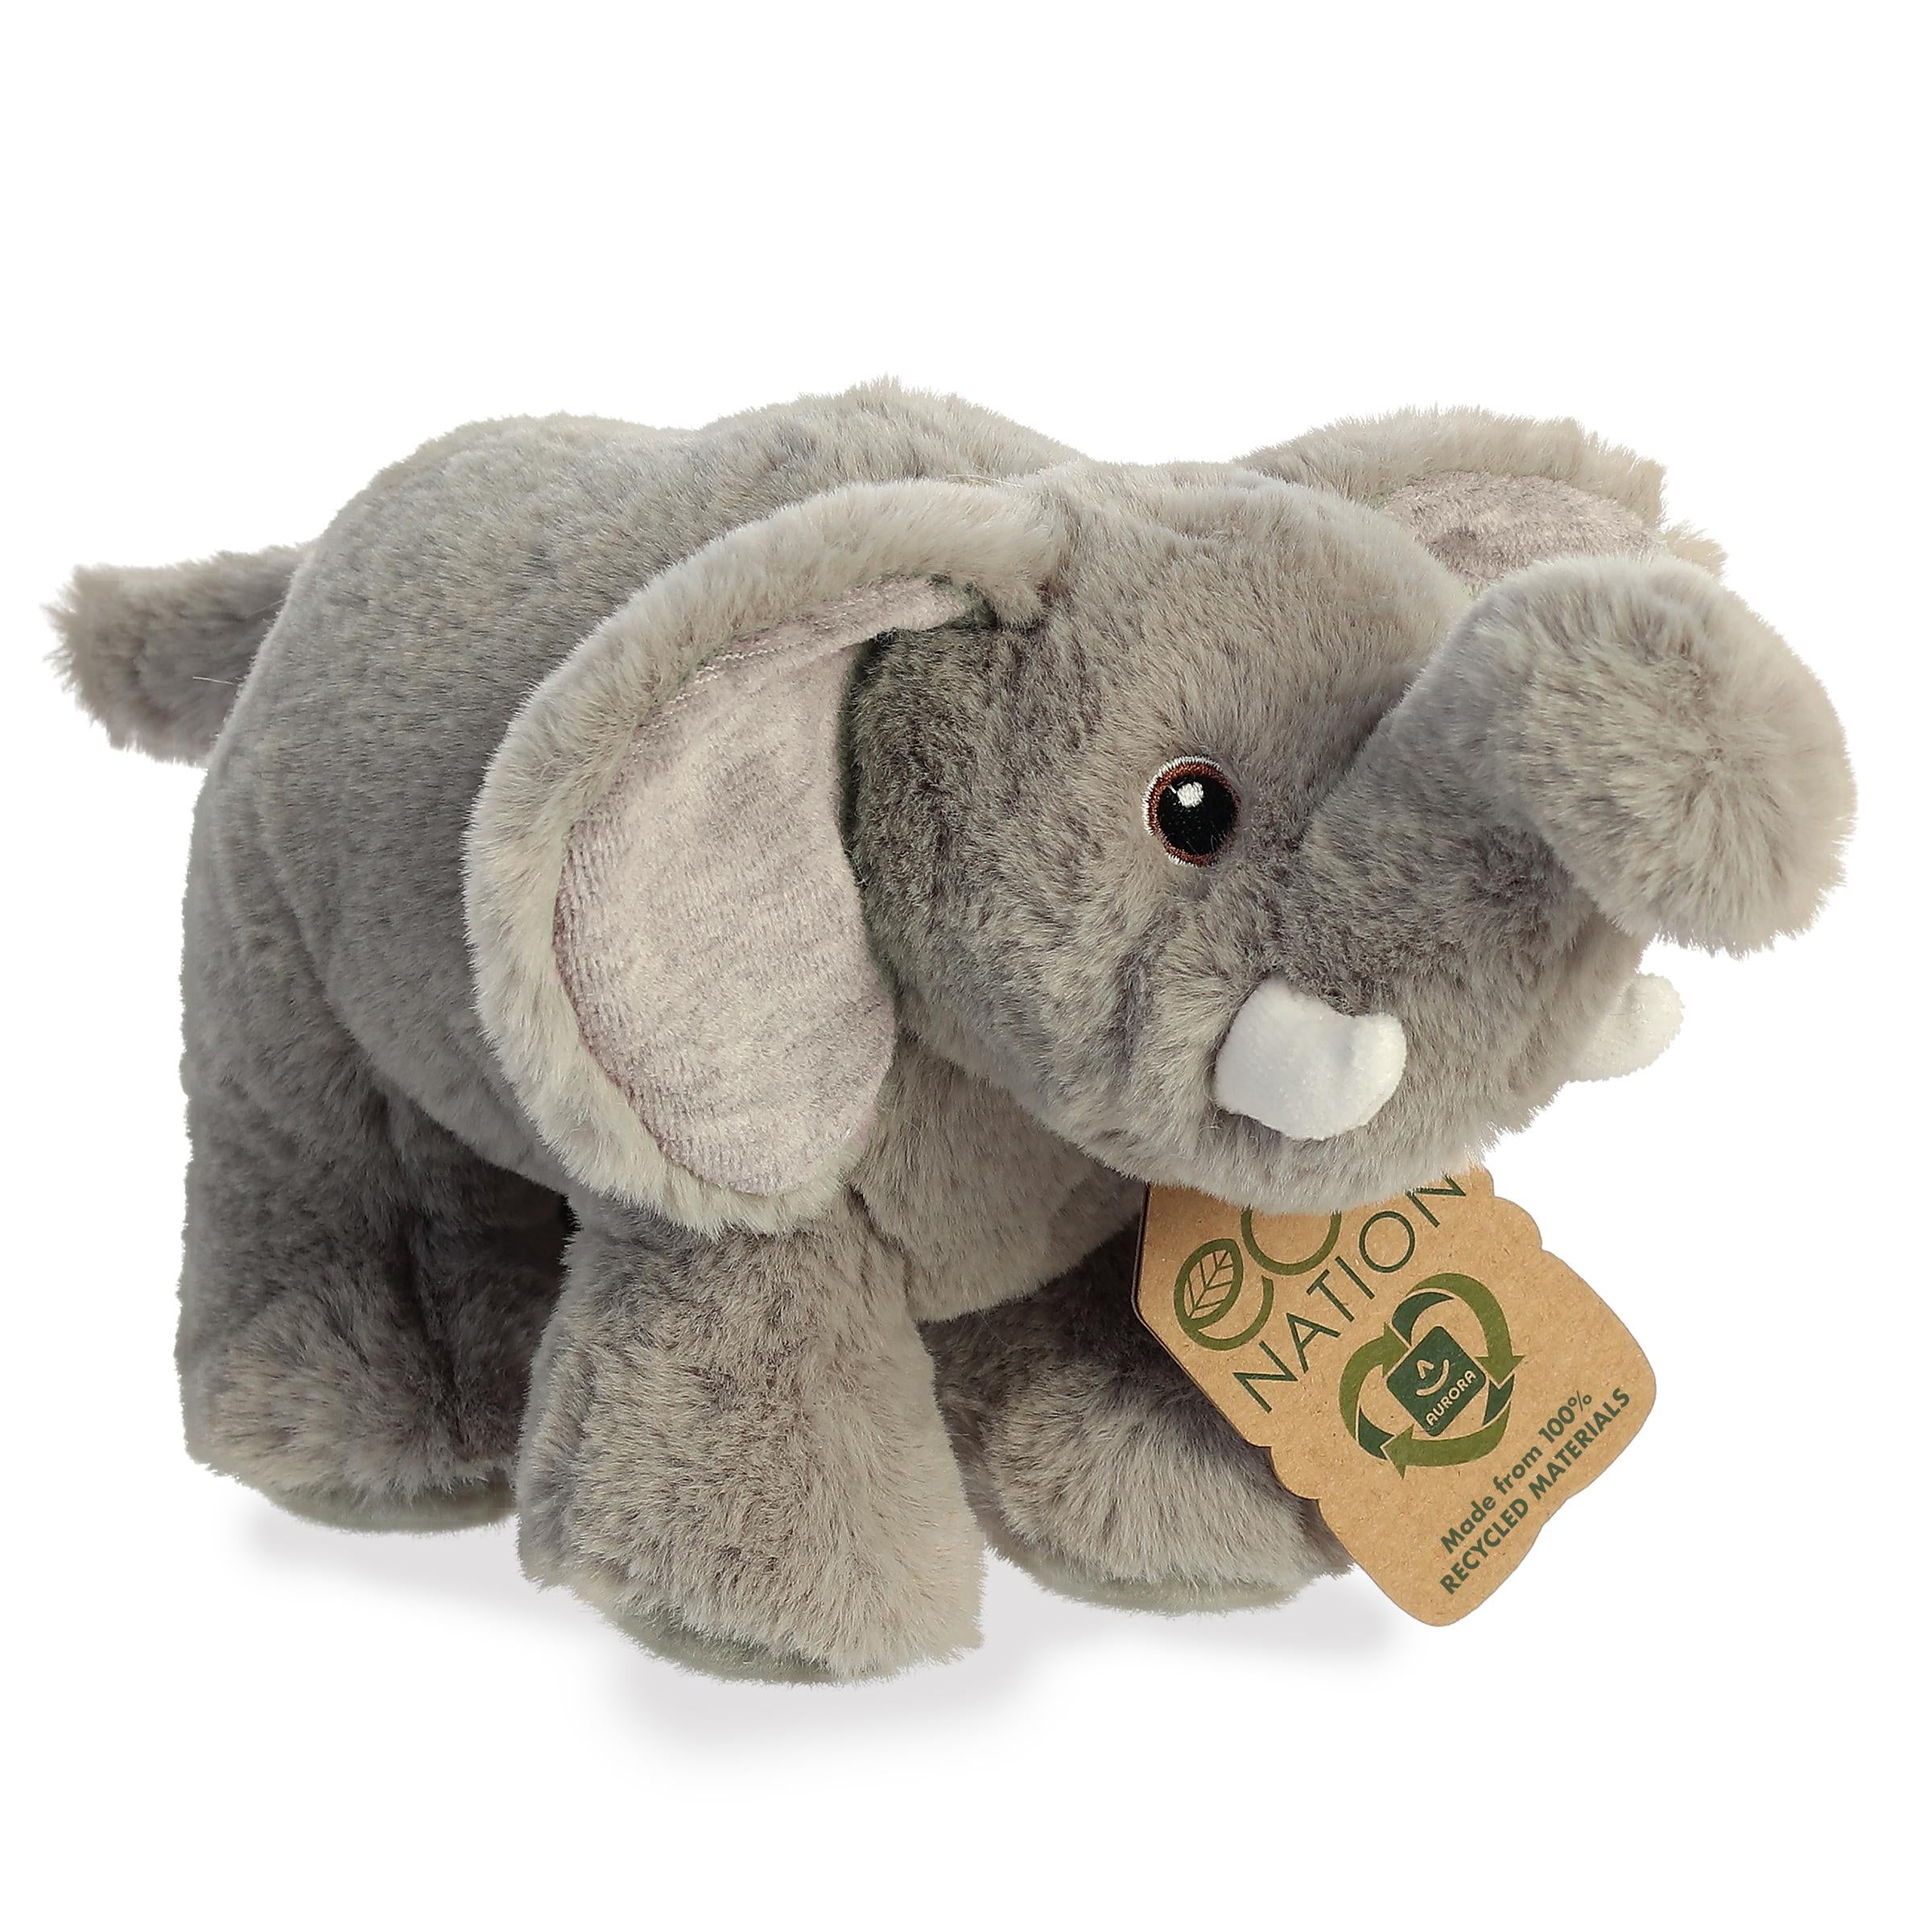 A lovable elephant plush resembling the real animal with a grey coat, trunk, two soft plush tusks, and an eco-nation tag